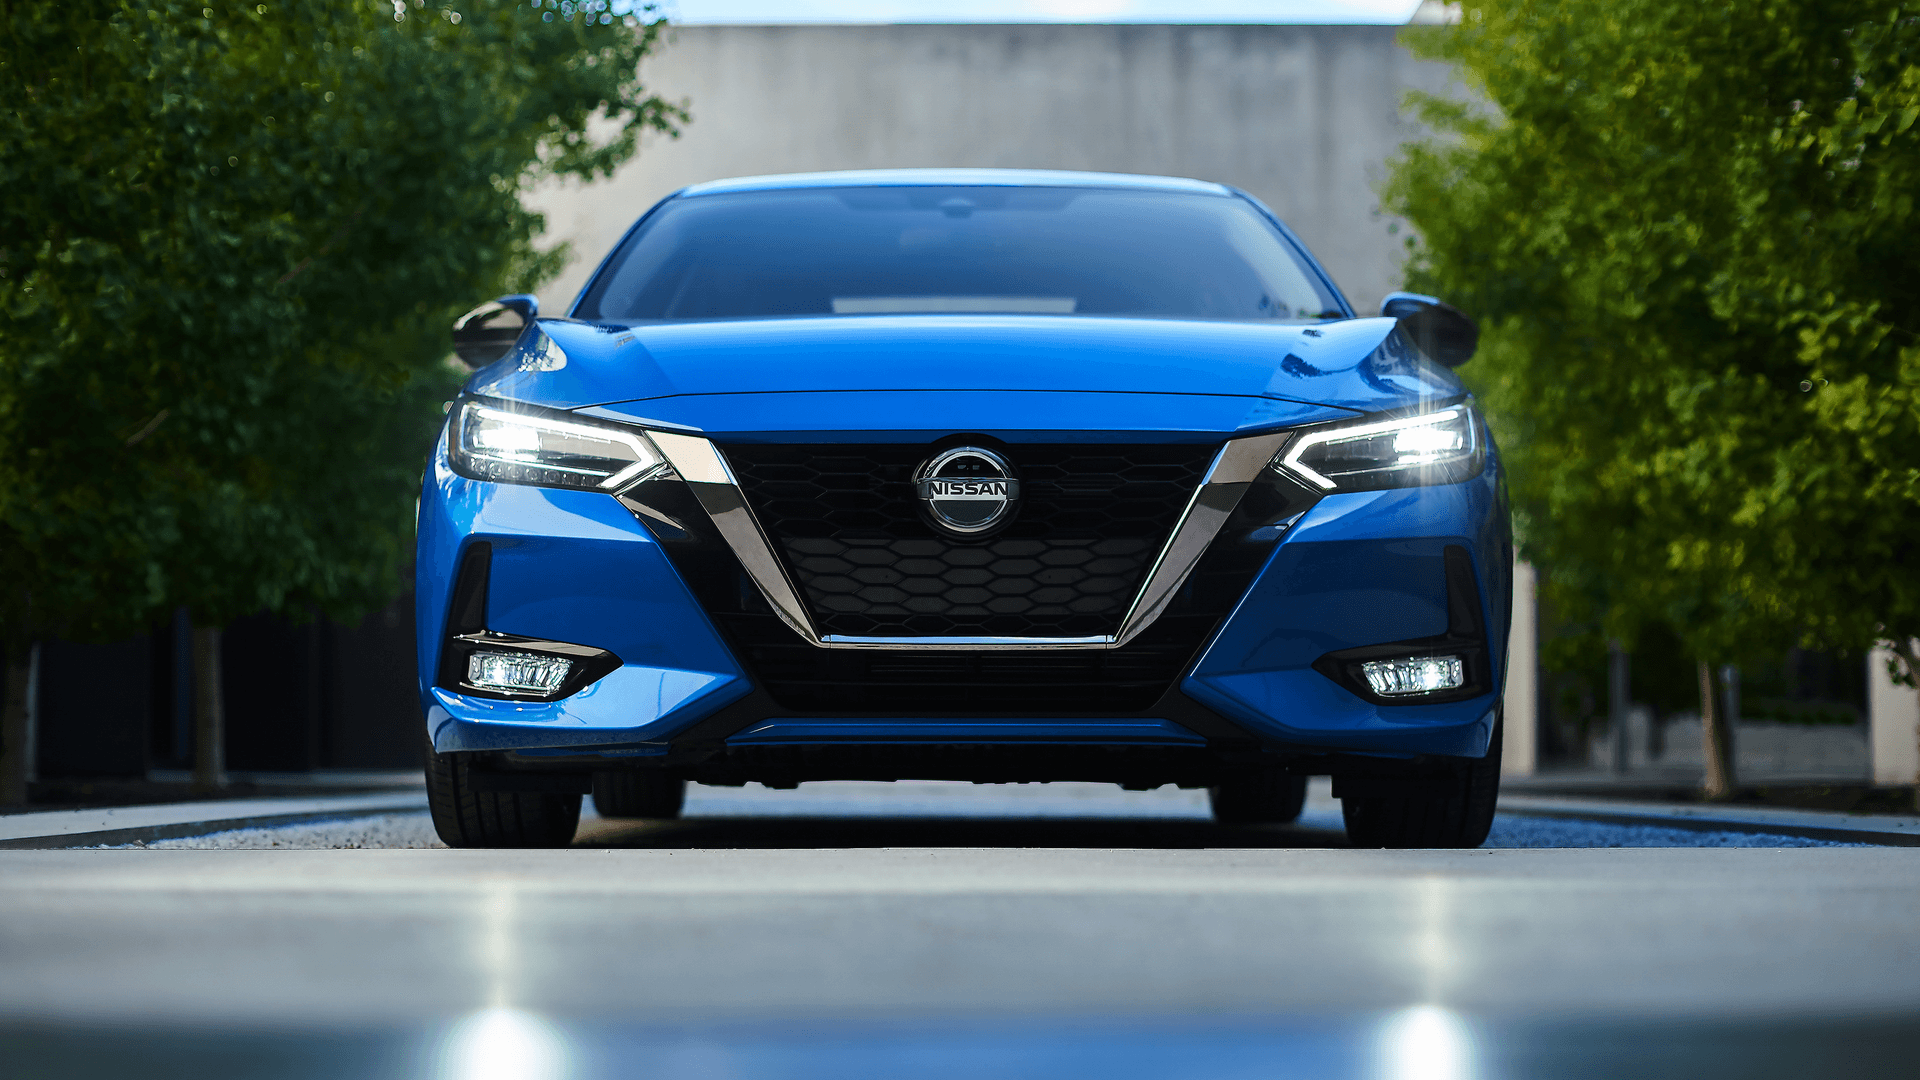 Front view of blue Nissan Sentra